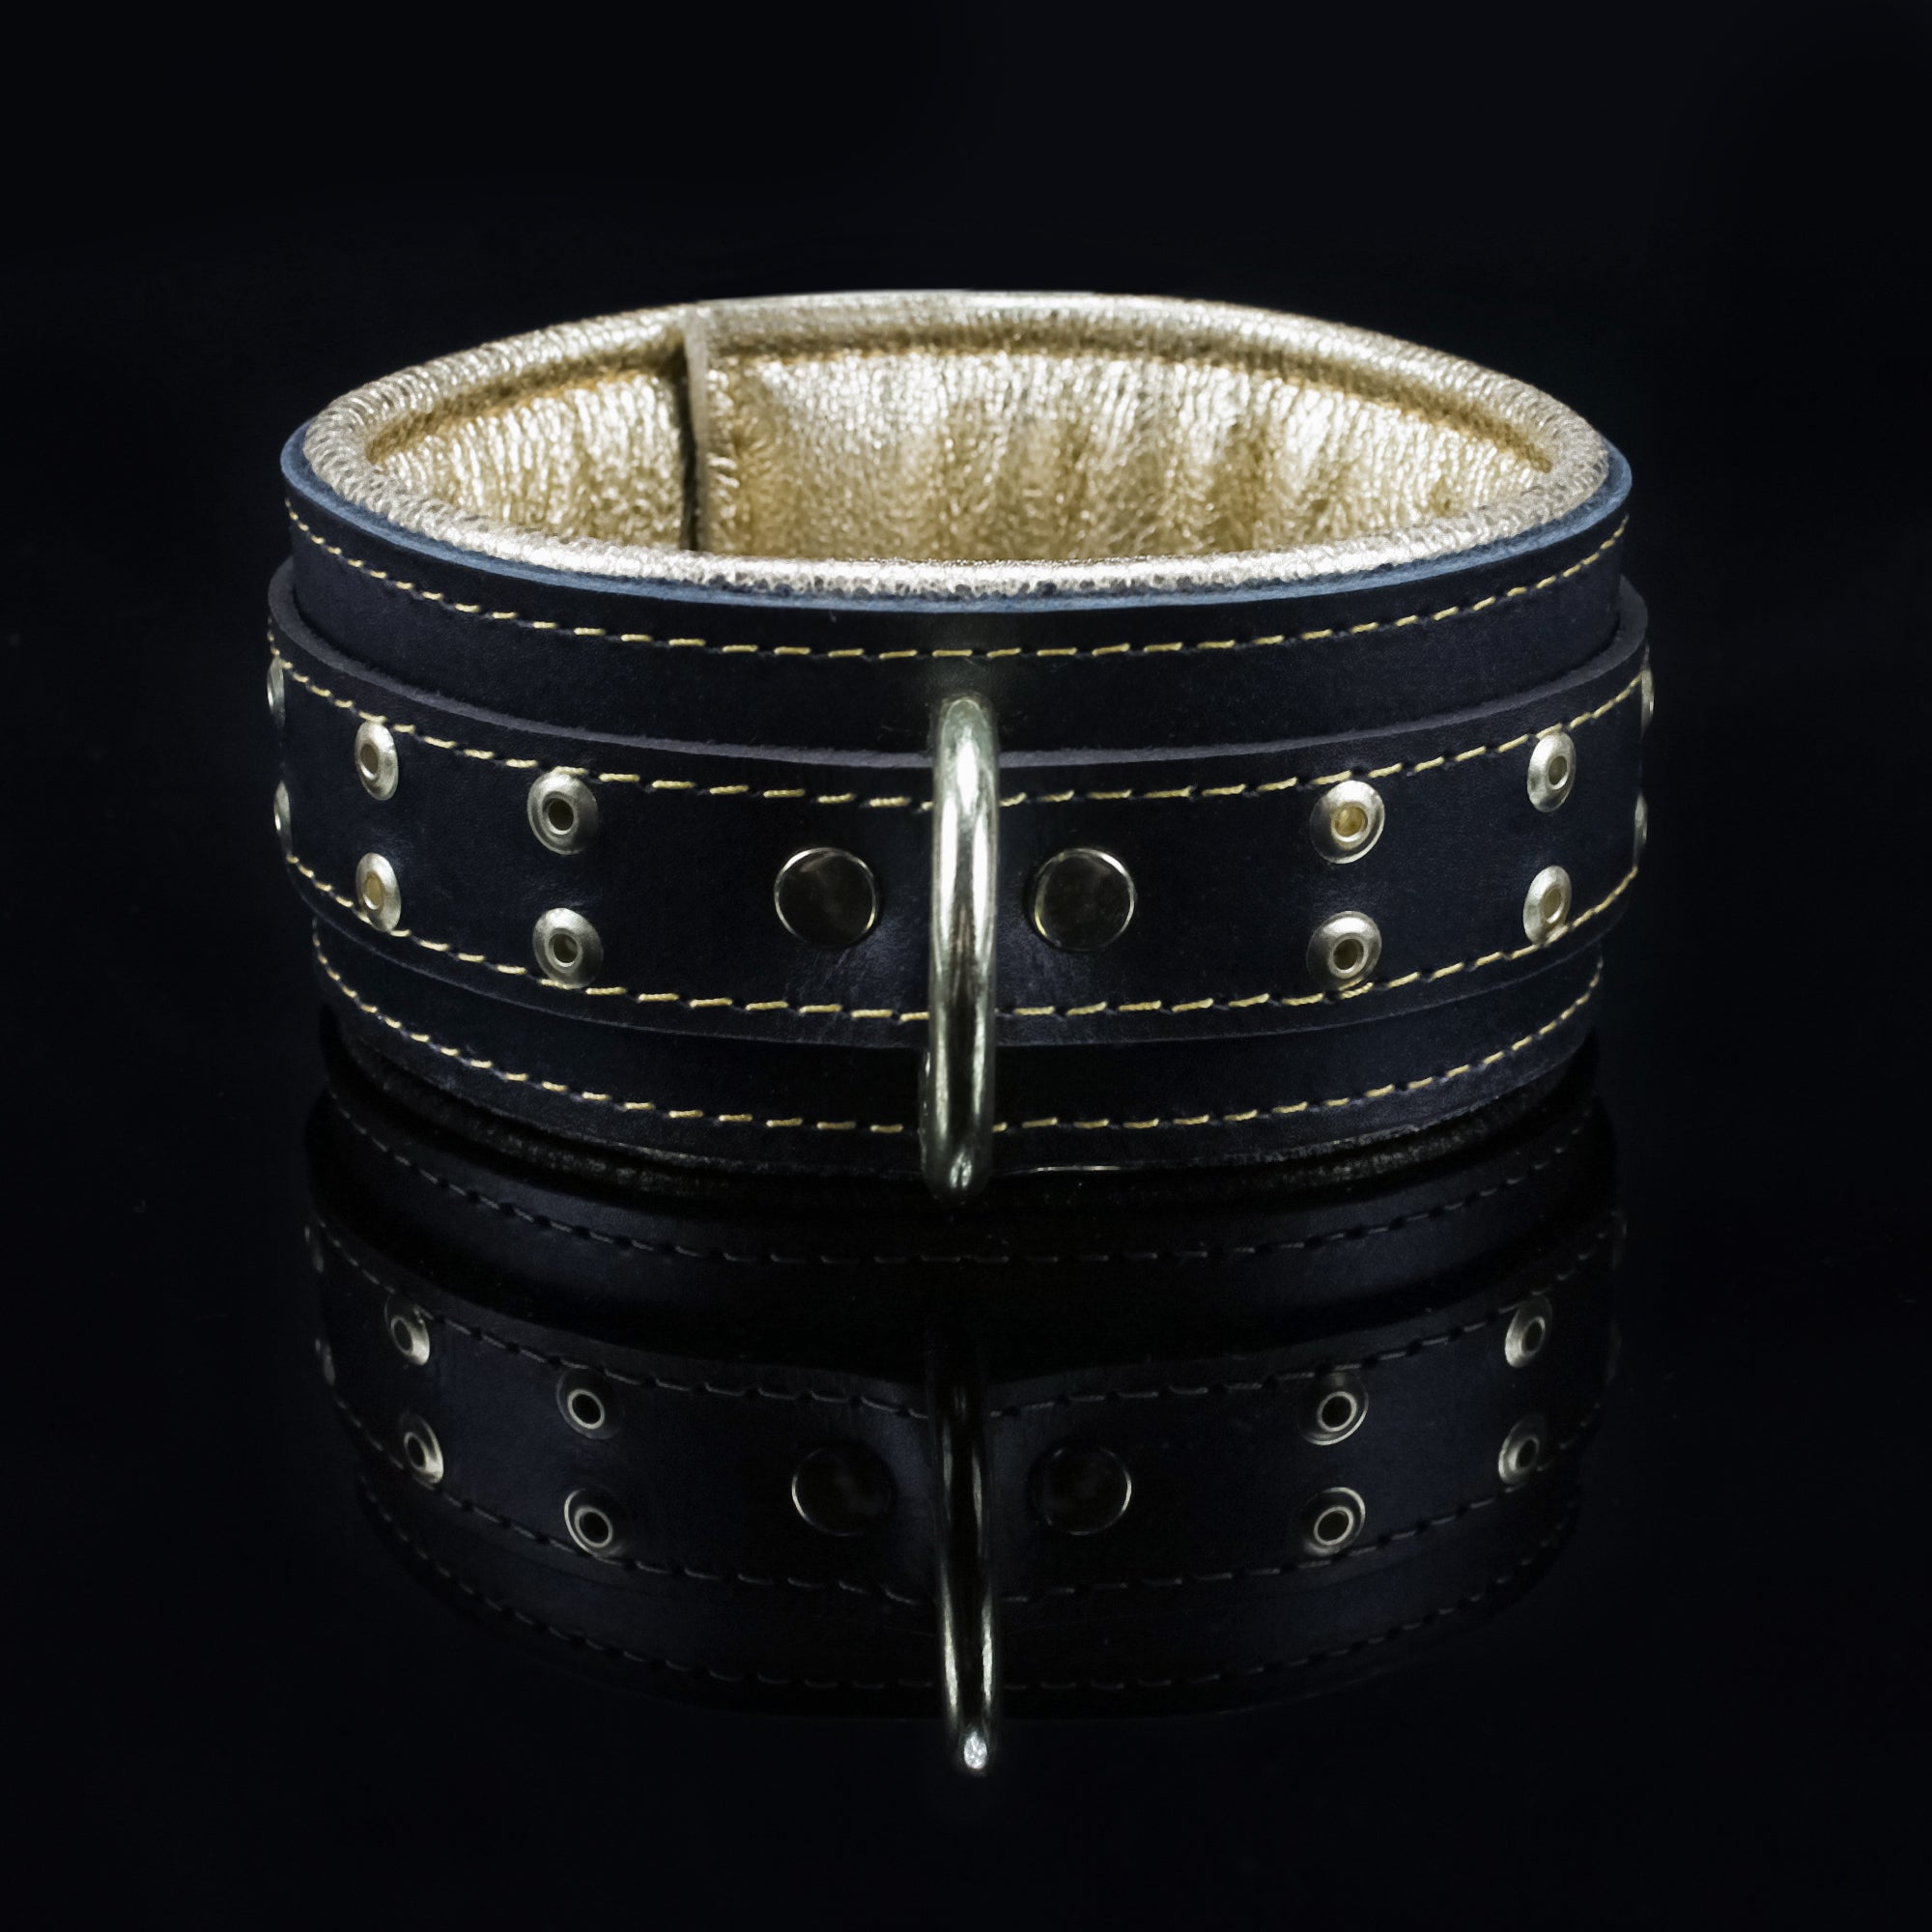 Luxury Gold and Black BDSM Submissive Collar On Black